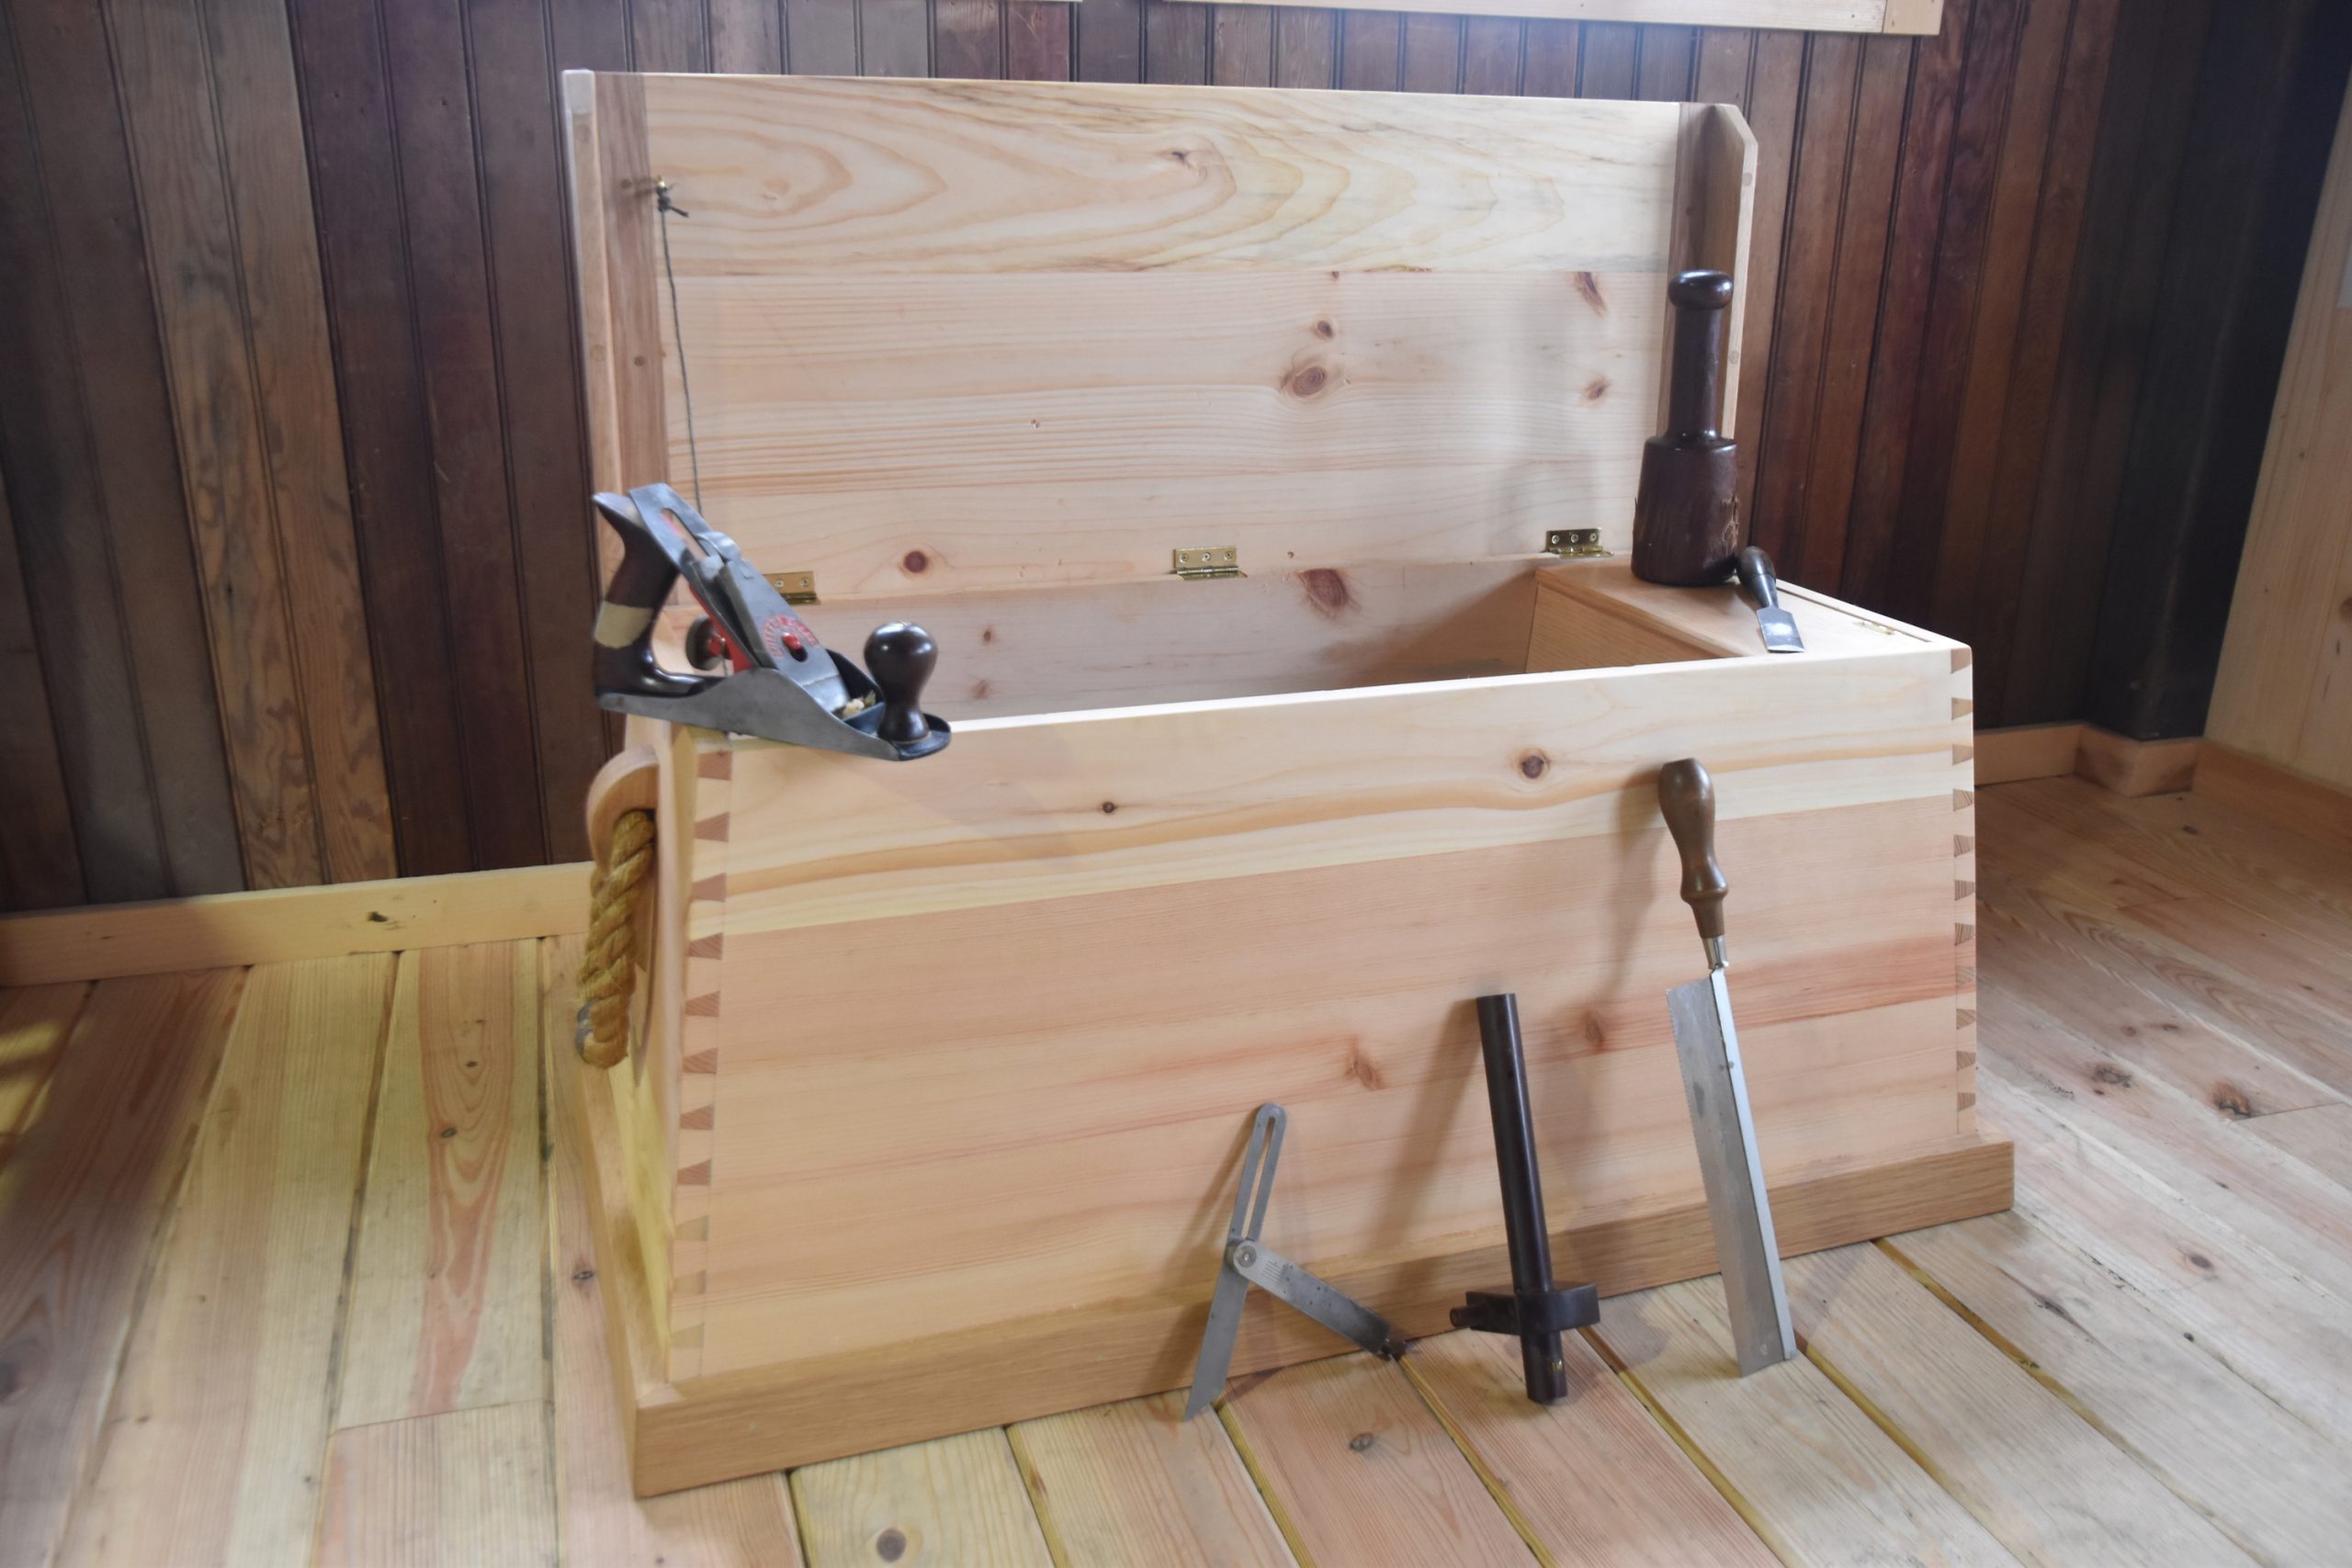 In an upcoming workshop at CBMM’s Shipyard to be held Feb. 25-26 and March 4-5, participants will have the opportunity to hone their woodworking skills while constructing their own 19th century sea chest.